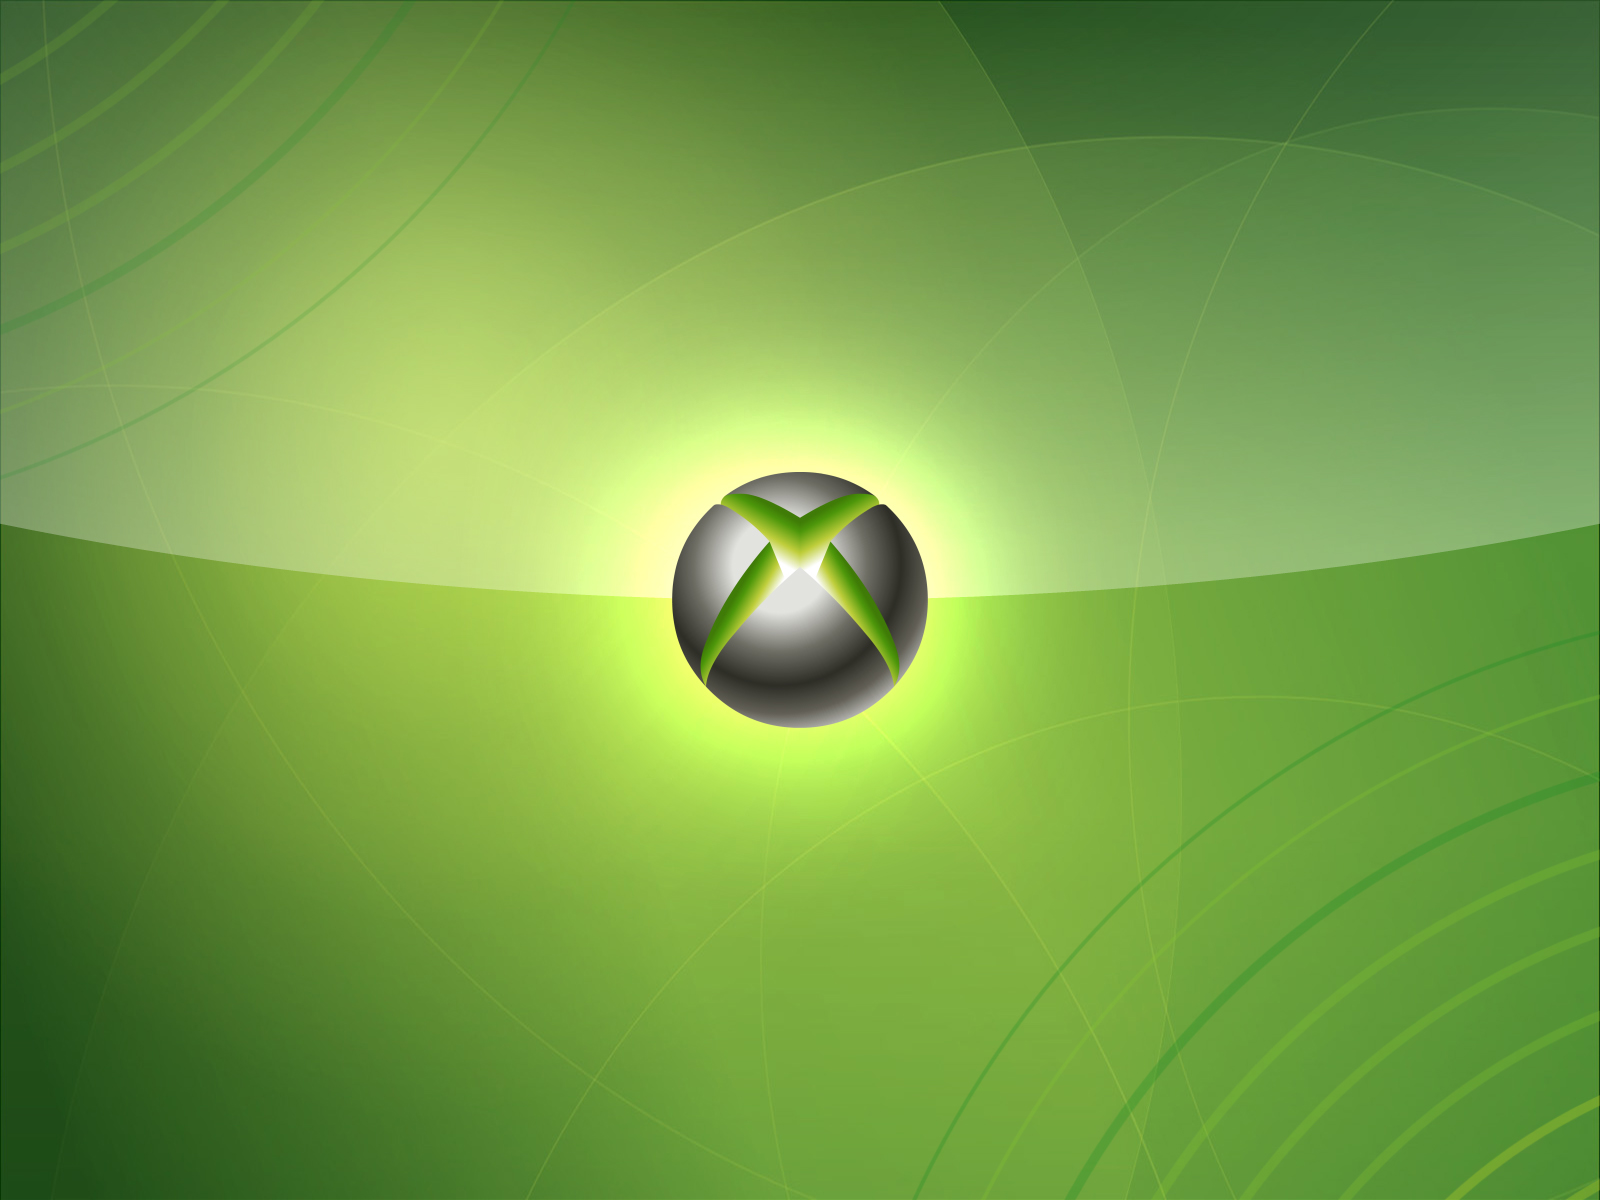 Xbox 360 Game Player, Gaming, xBox High Definition Wallpapers, Xbox 360 E3